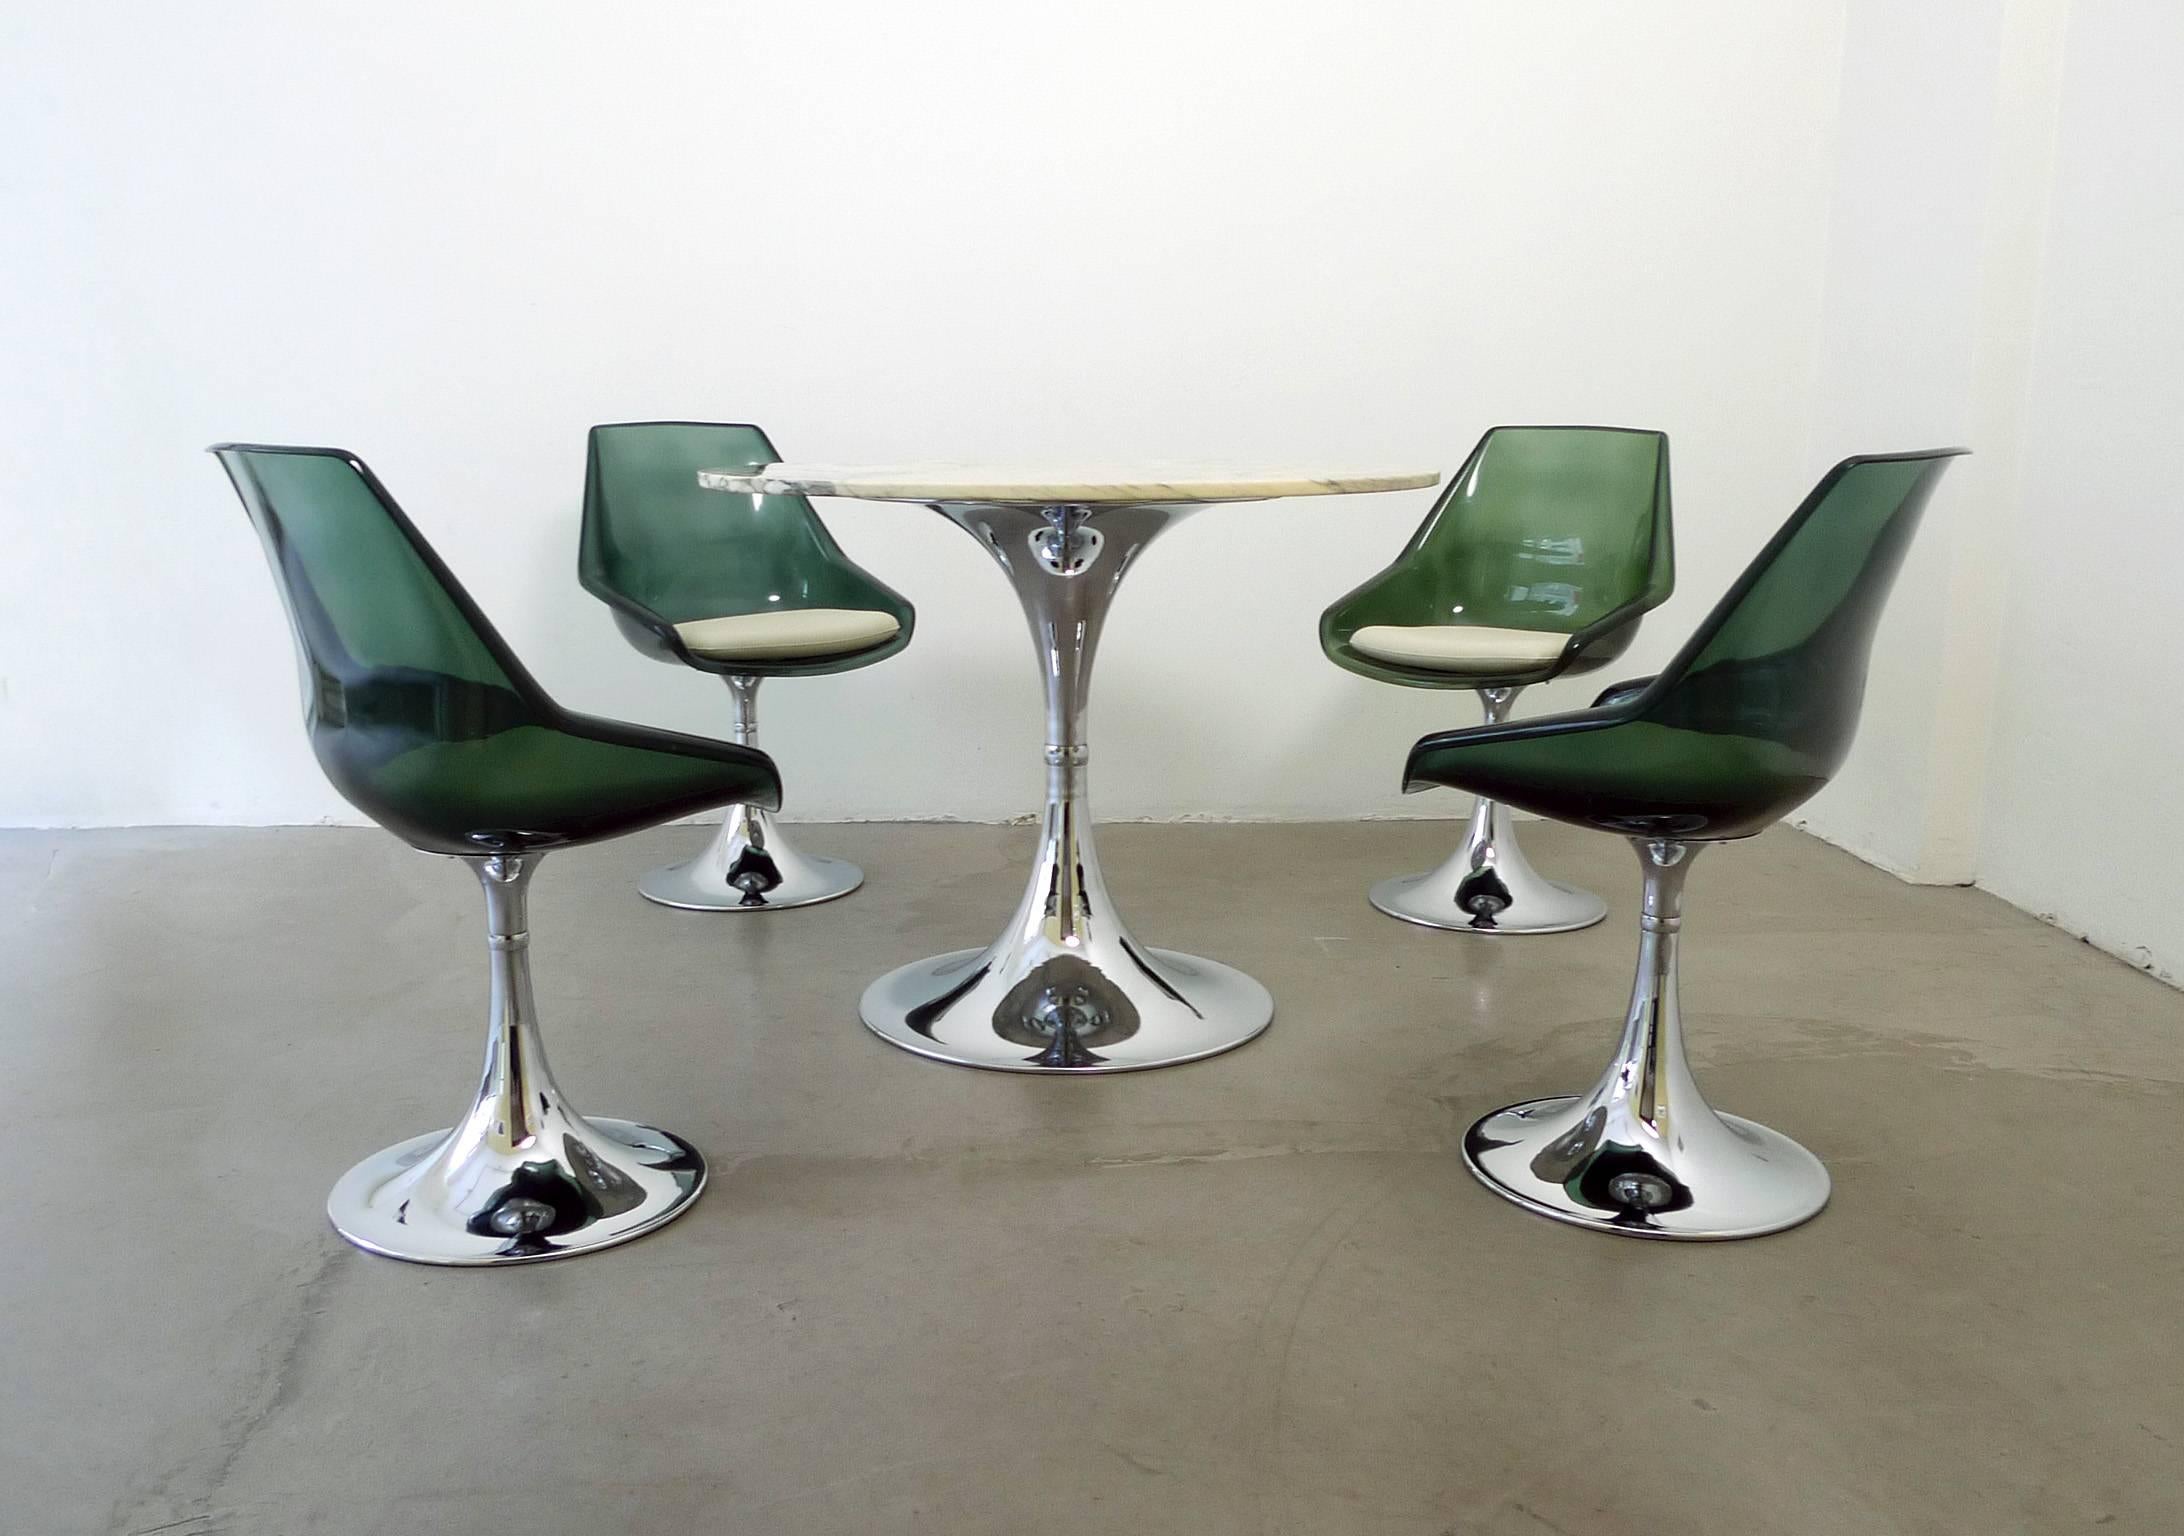 Amazing French set of four chairs and a dining table with elegant chromed metal bases in tulip form from the 1970s.
The tulip table has a green burred marble plate with a diameter of 100 cm and is 76 cm high.
The seats of the chairs are rotatable